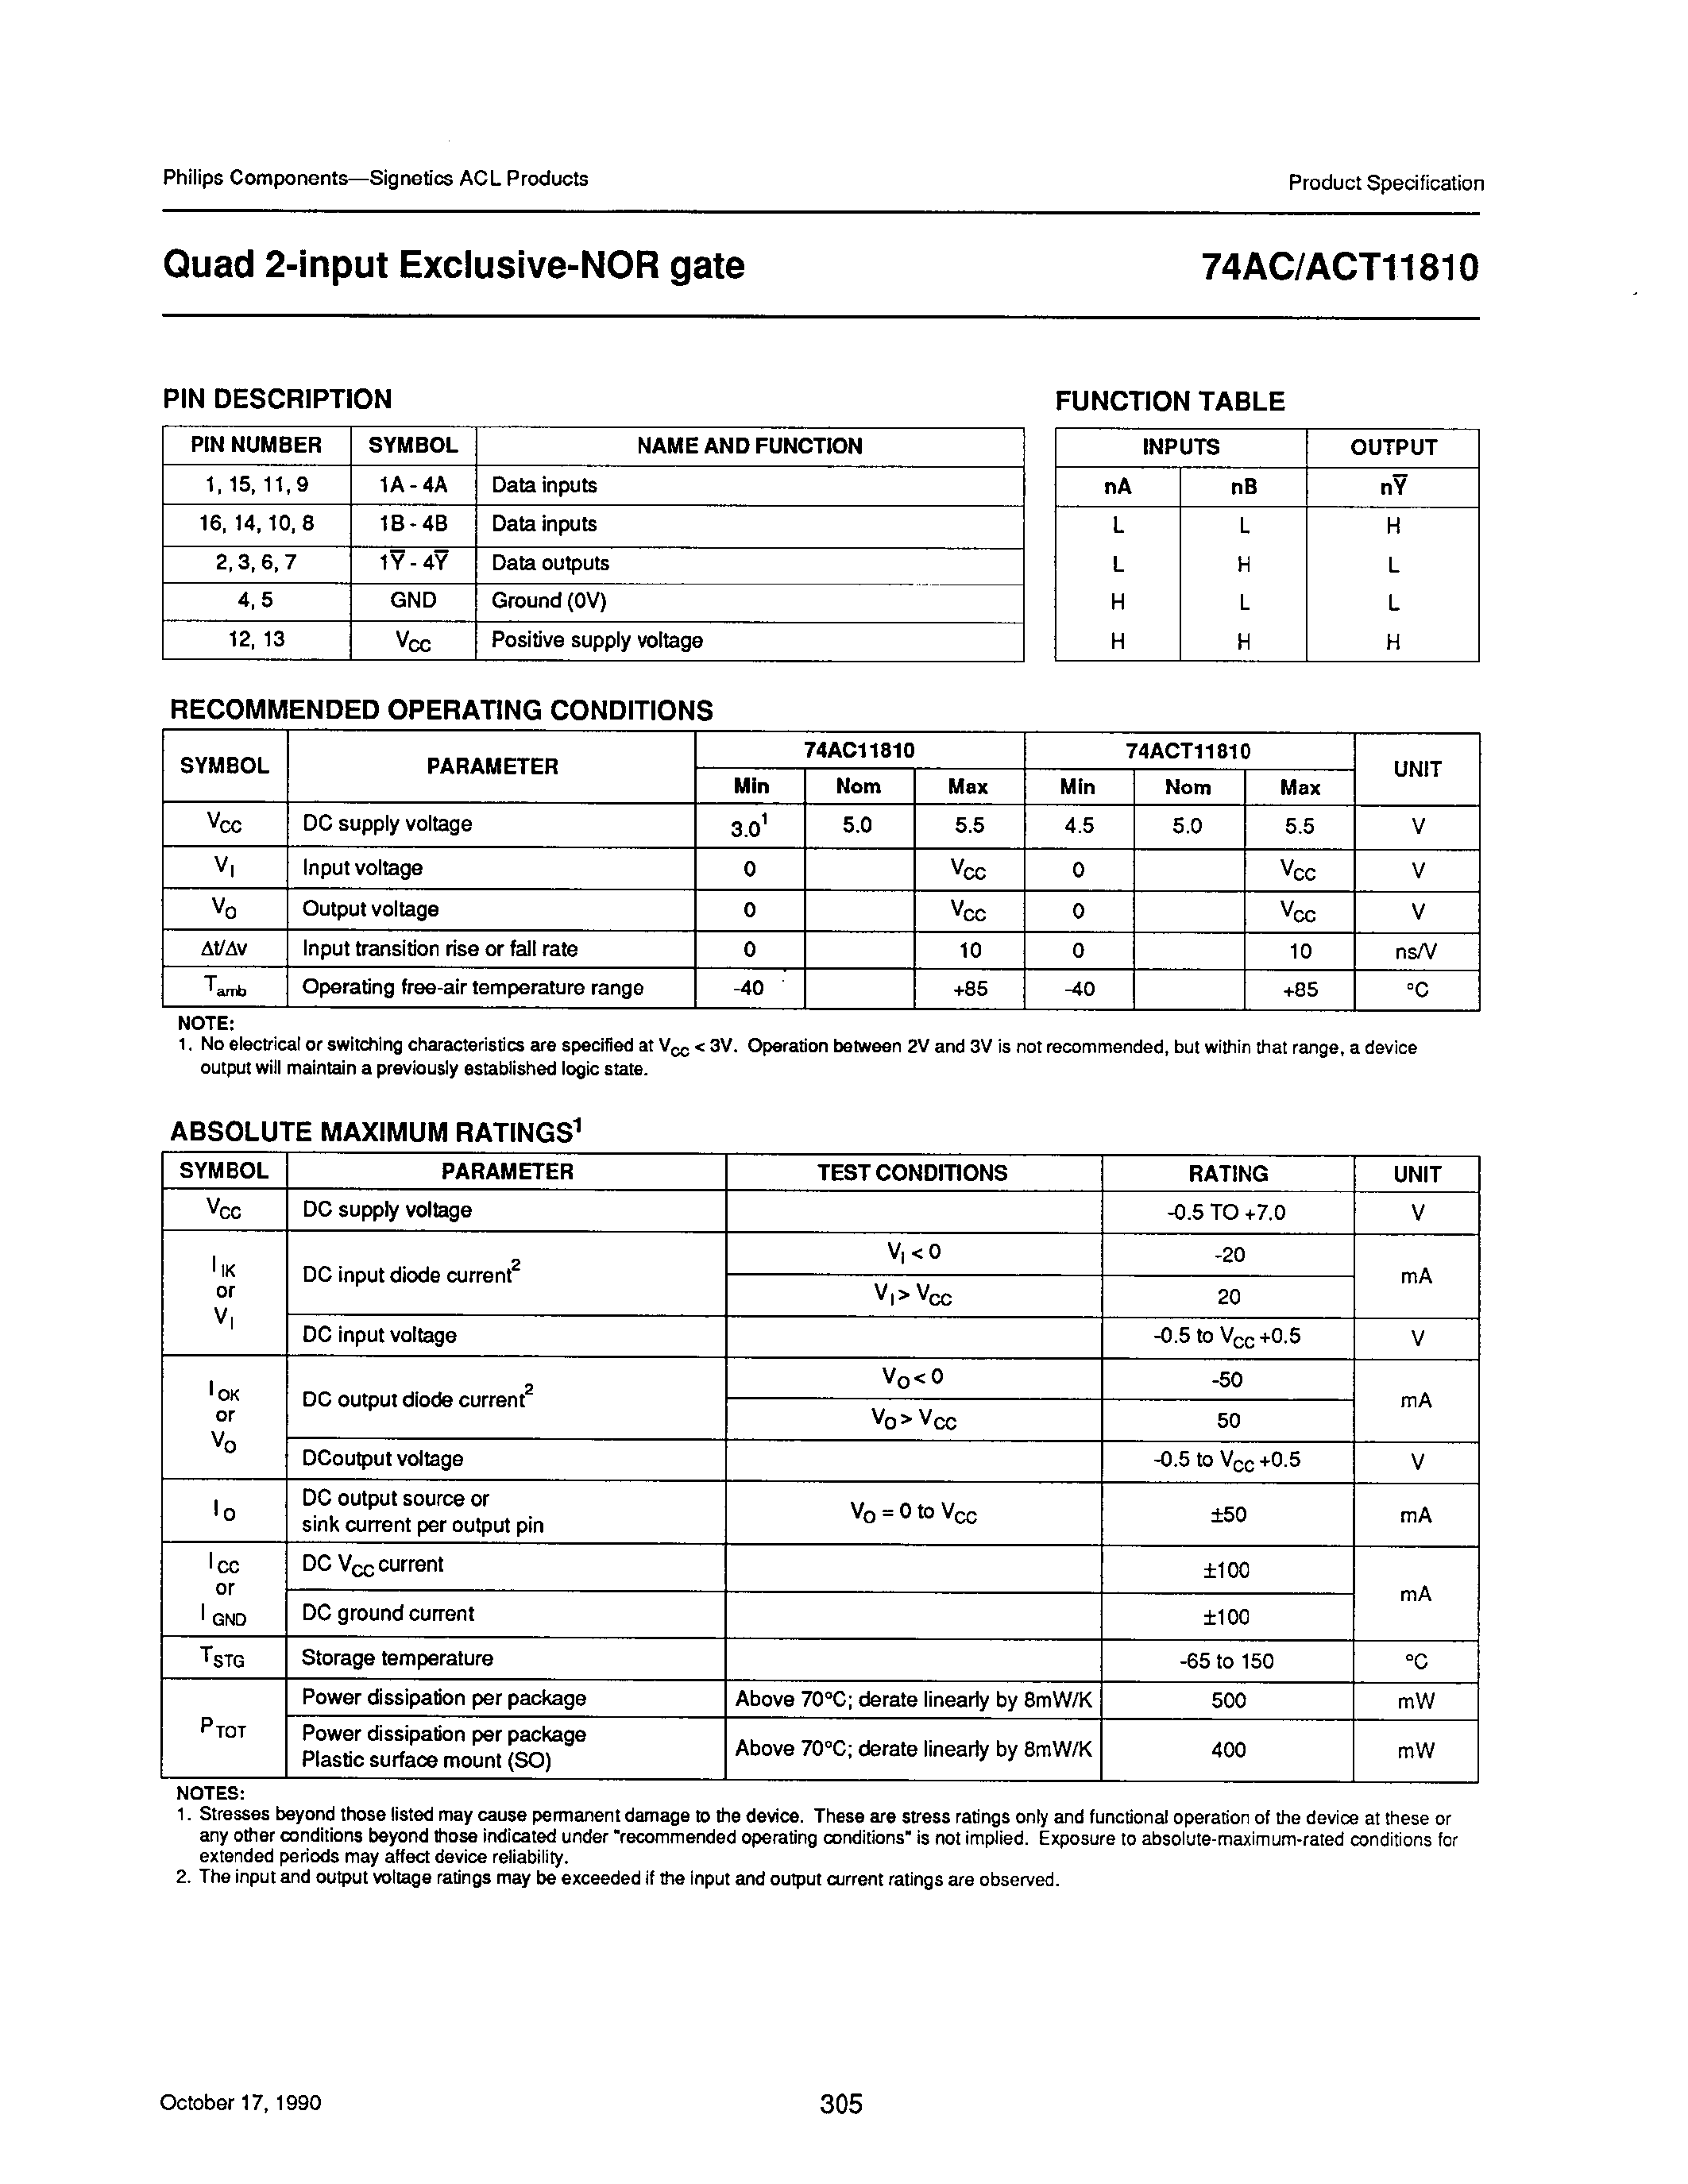 Datasheet 74AC11810 - QUAD 2-INPUT EXCLUSIVE-NOR GATE page 2